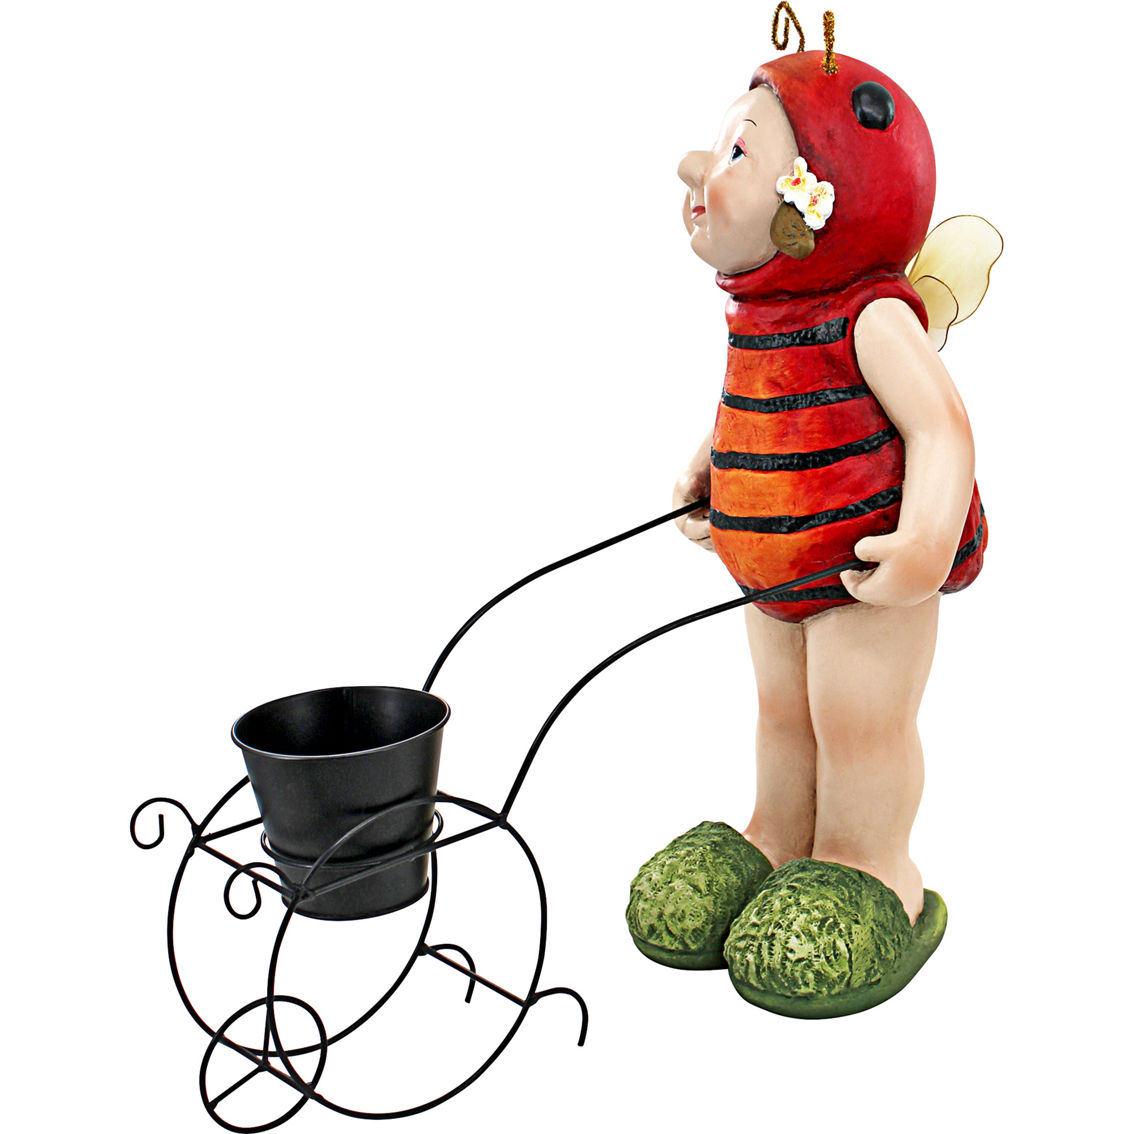 Design Toscano Polly the Lady Bug Fairy Statue - Image 4 of 8